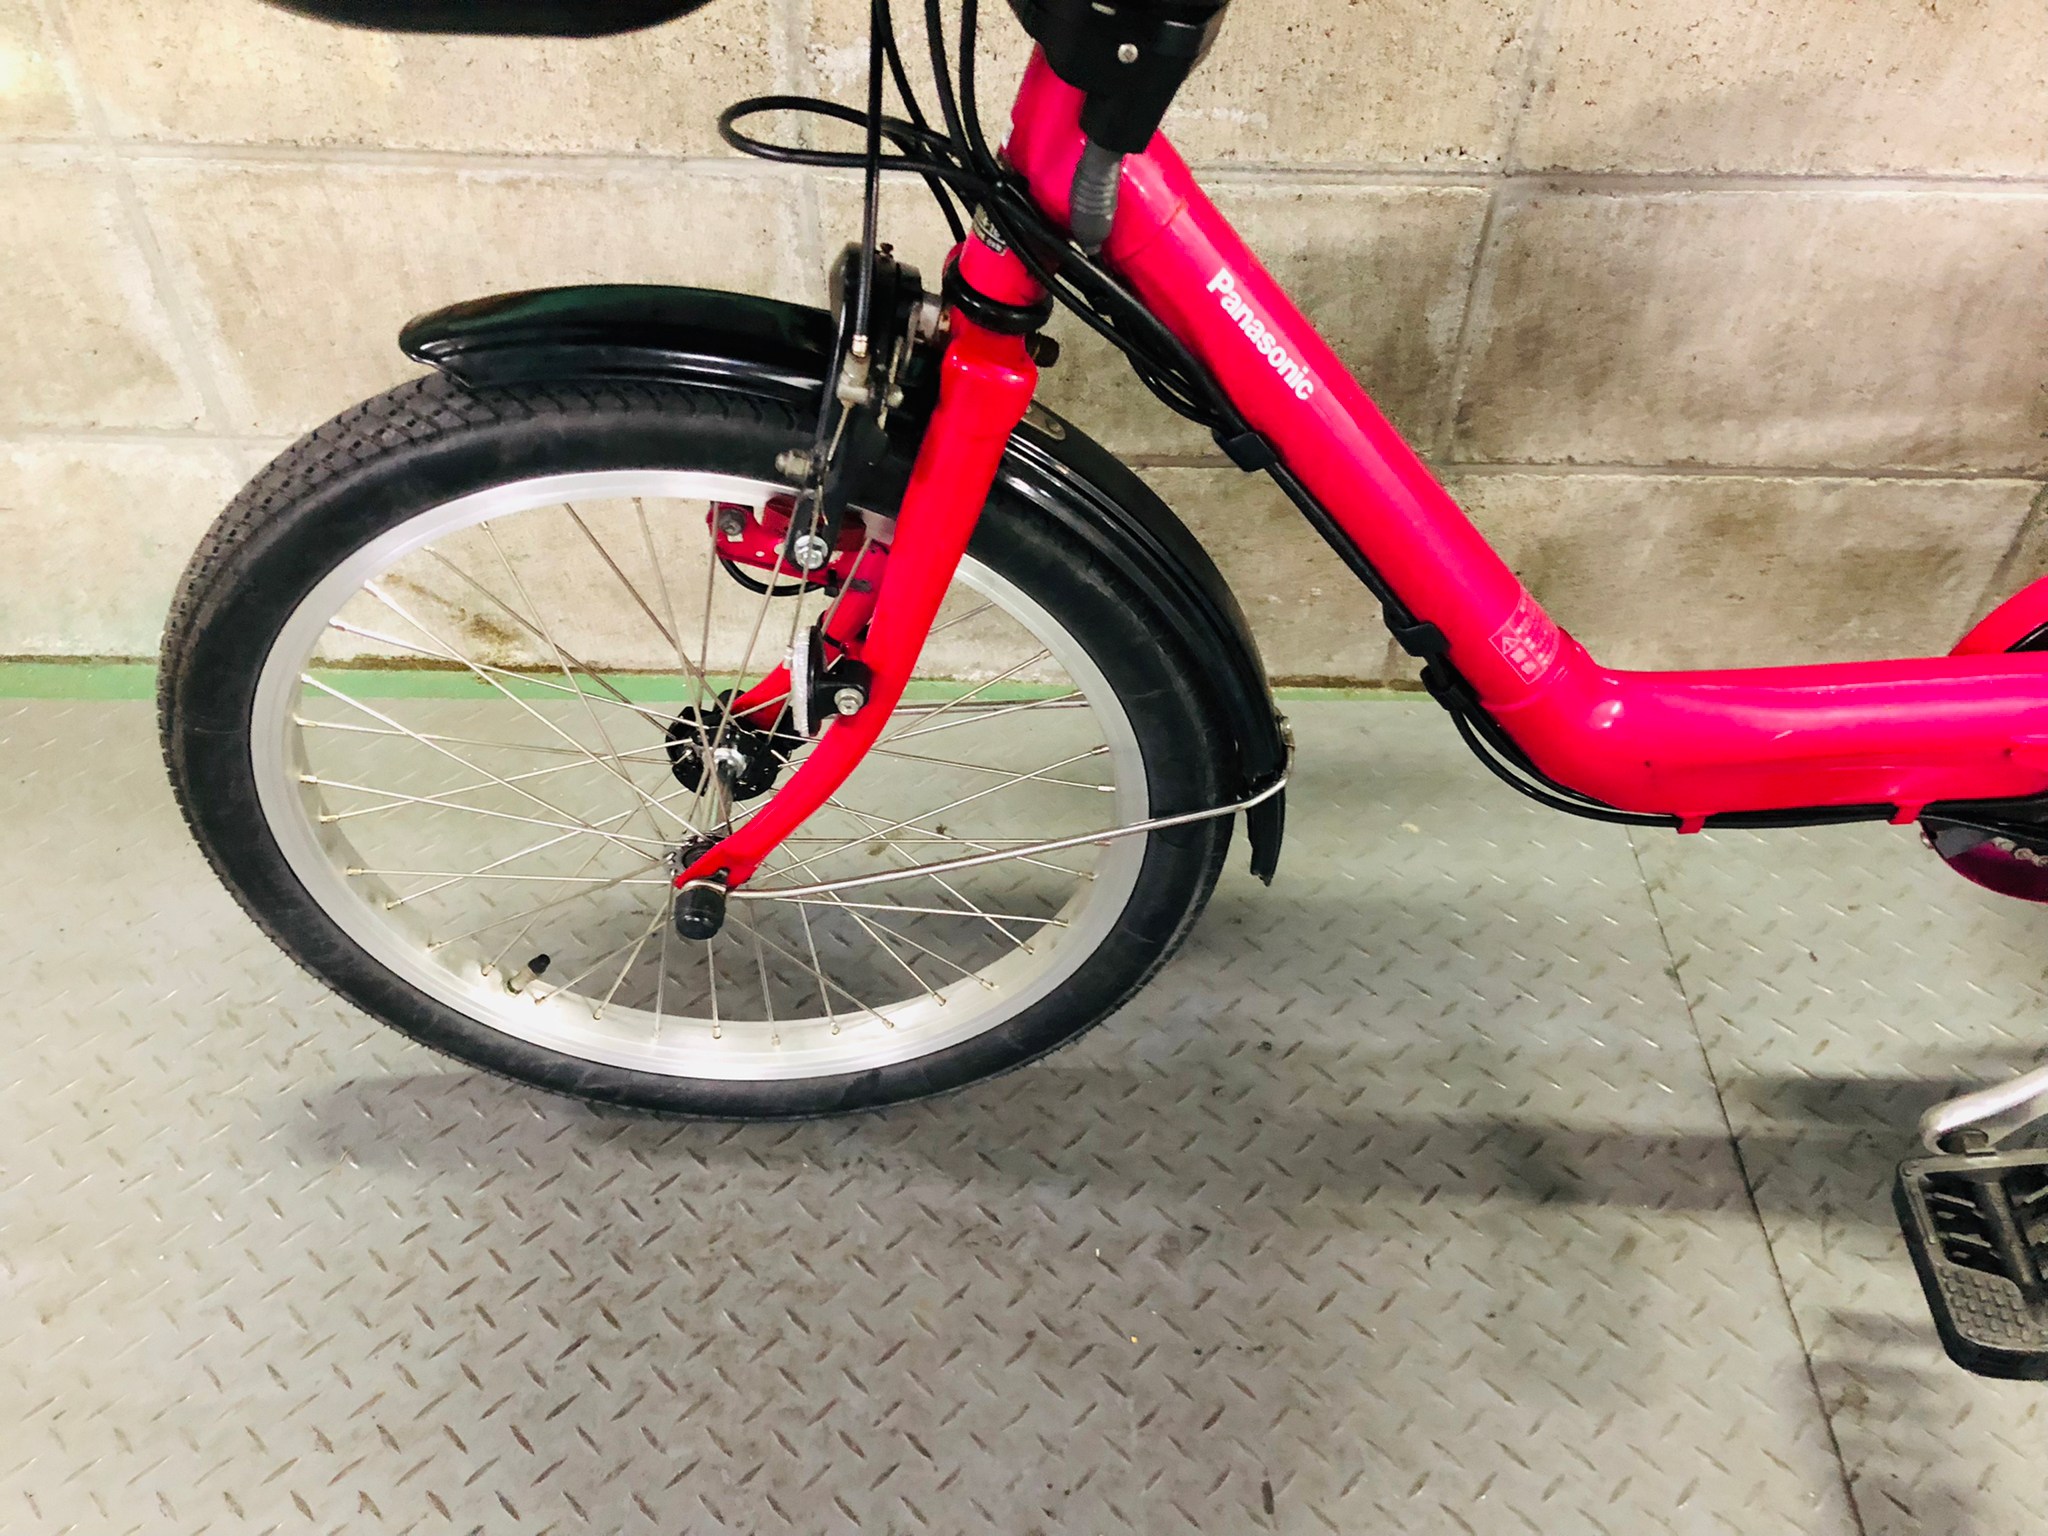 SOLD OUT】電動自転車 パナソニック GYUTTO ピンク 20インチ 前後子供 